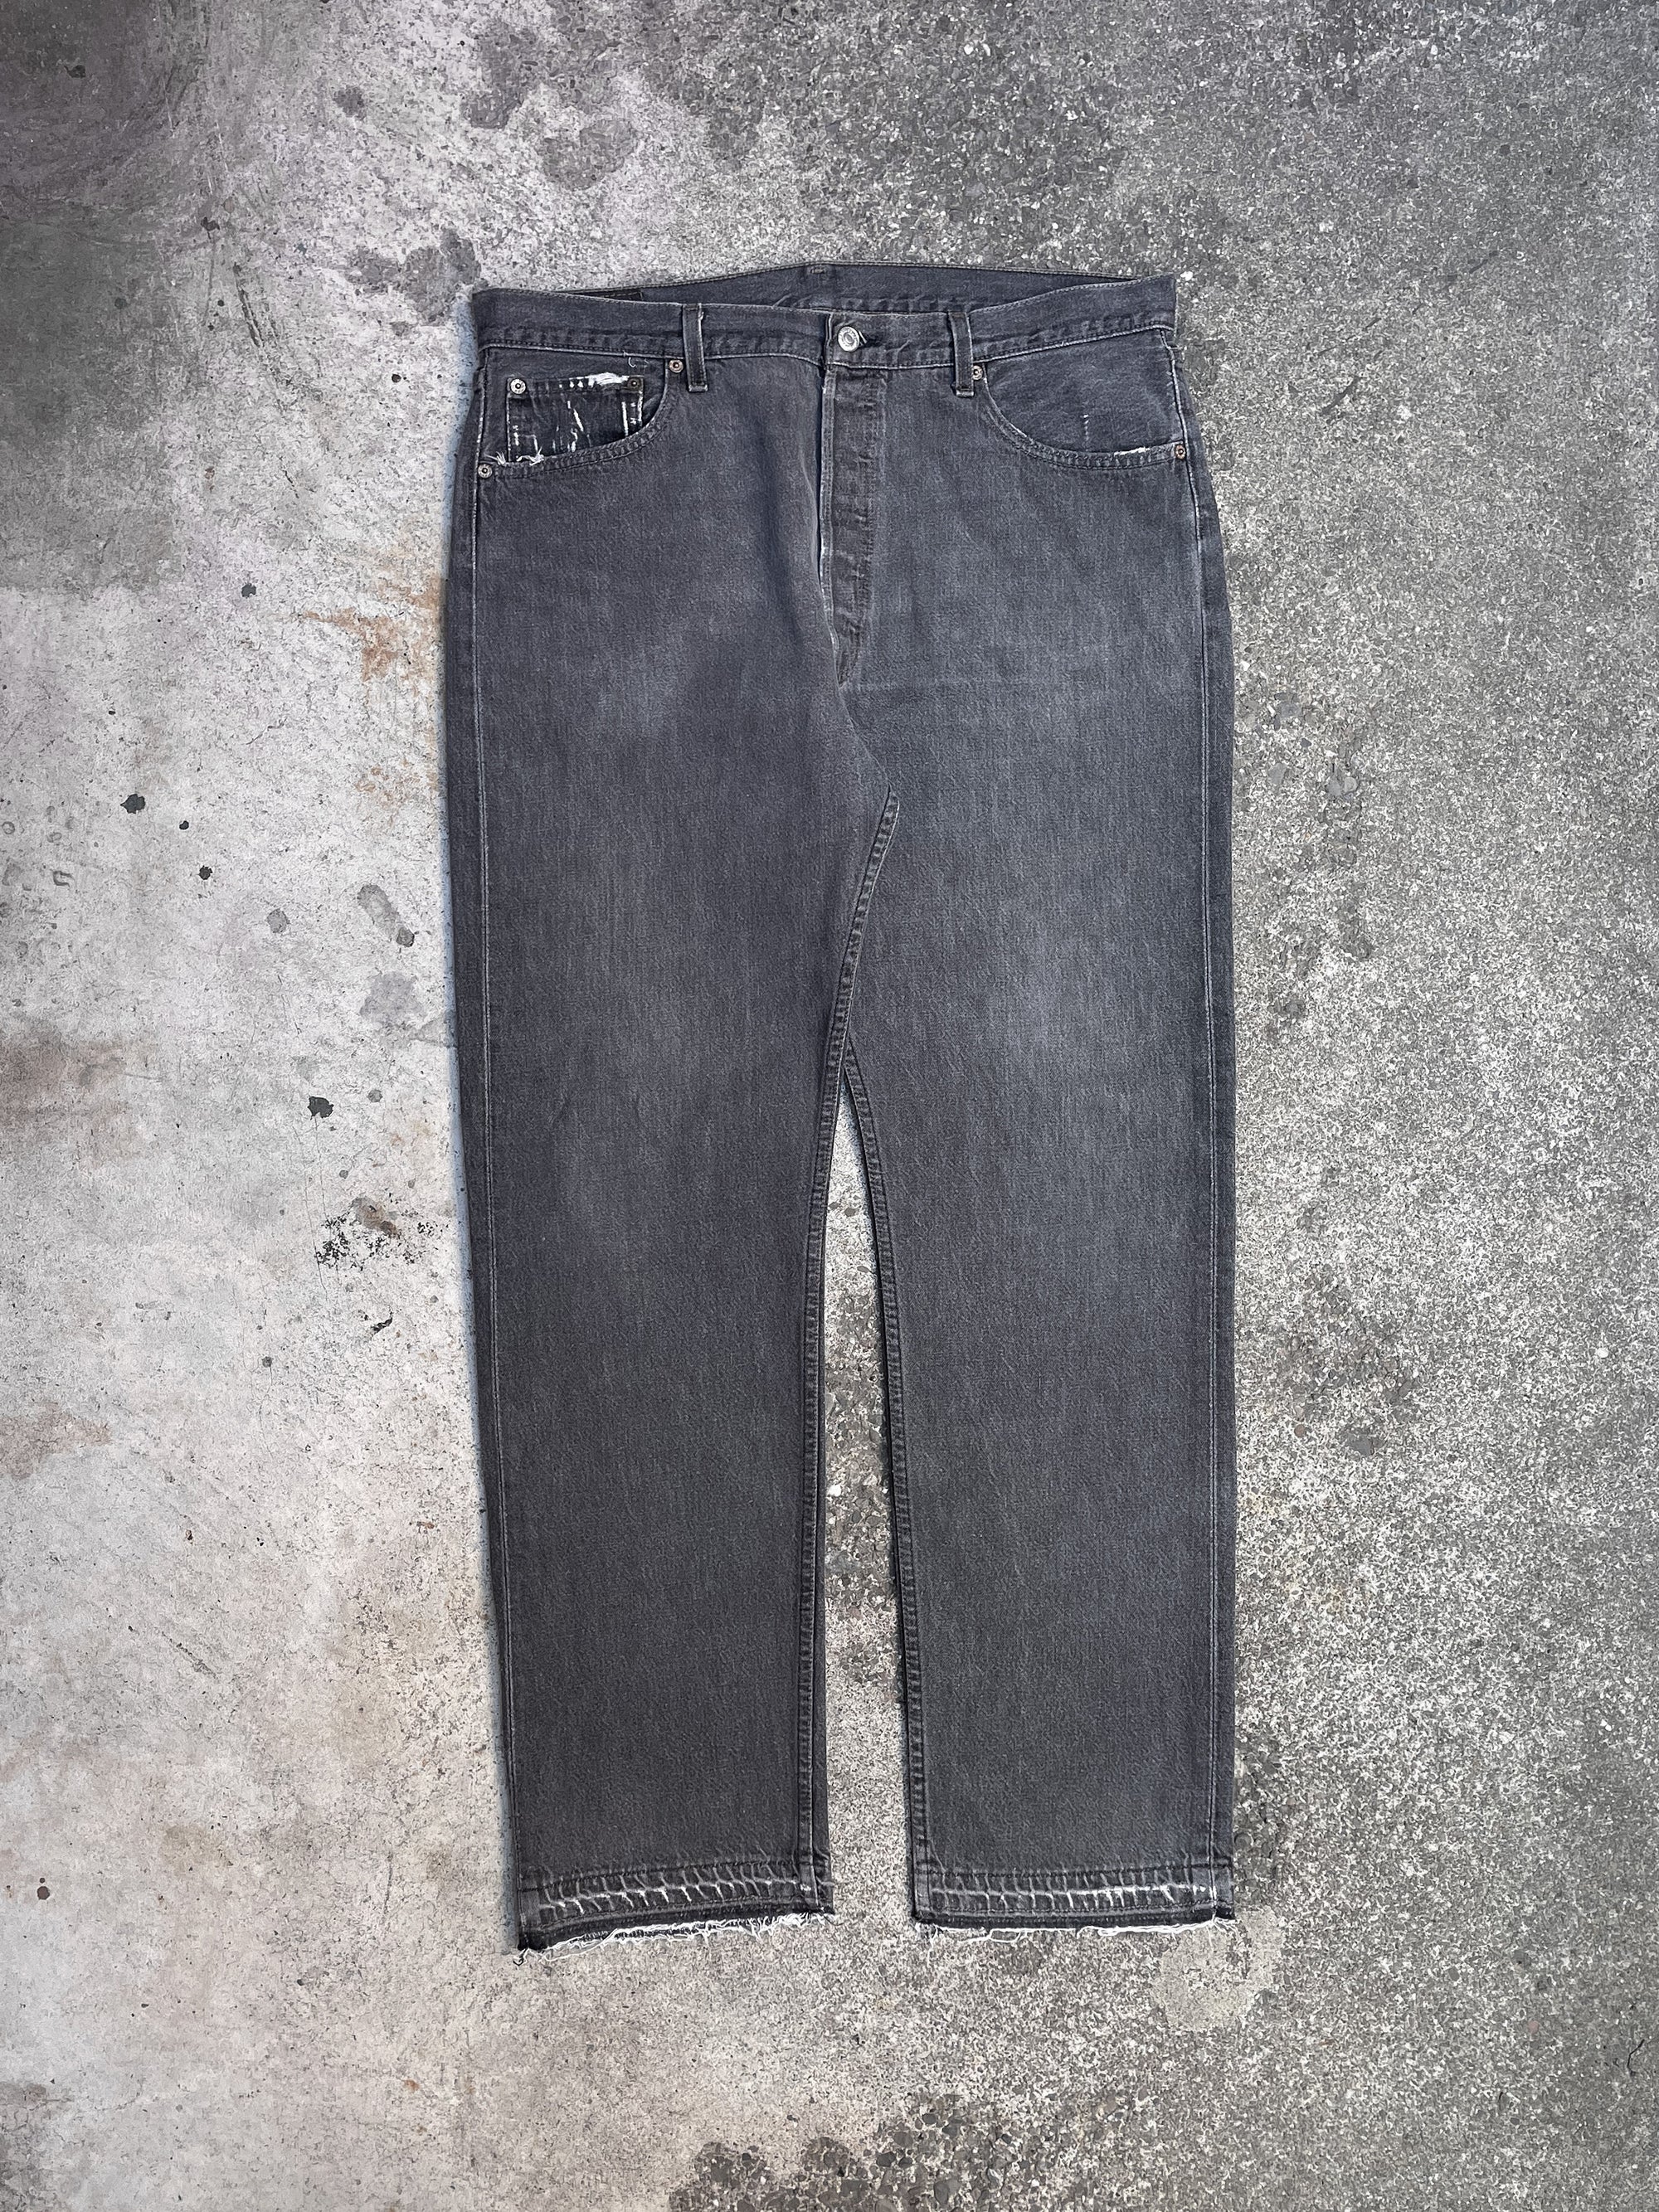 1990s Levi’s Repaired Faded Grey 501 Released Hem (36X31)